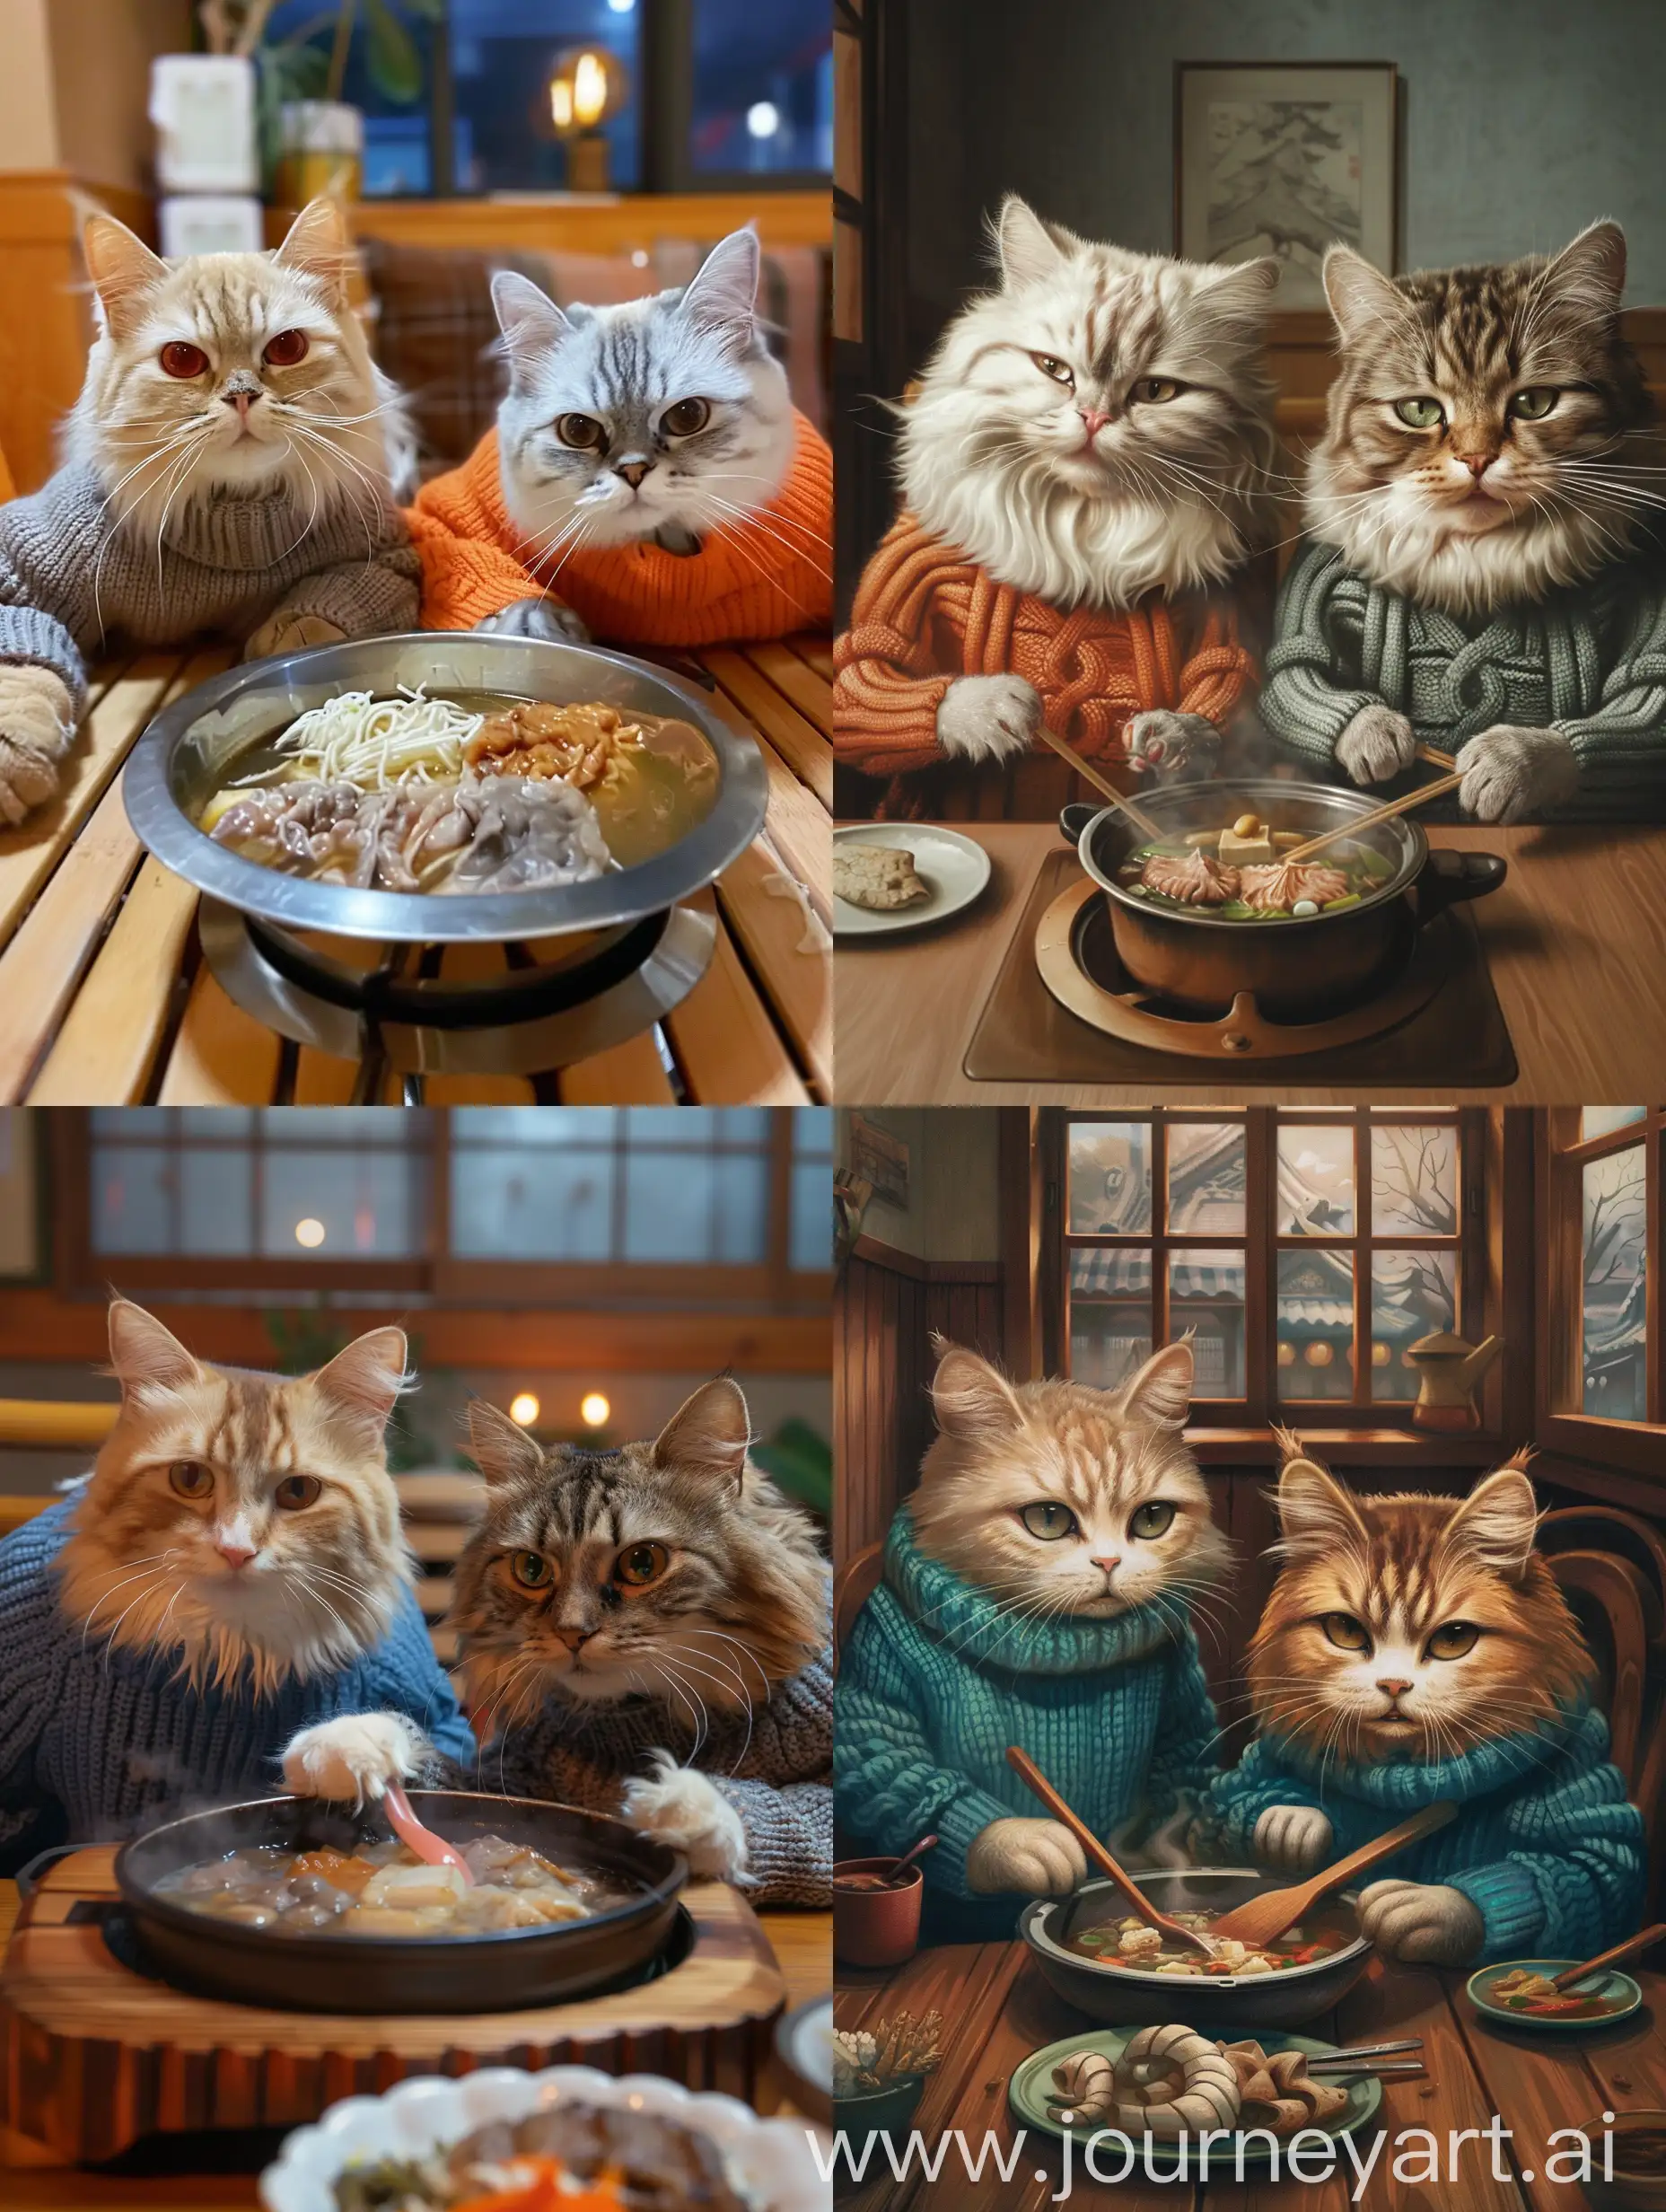 Two real cats, wearing woolen sweaters, are having a hotpot dinner at home.